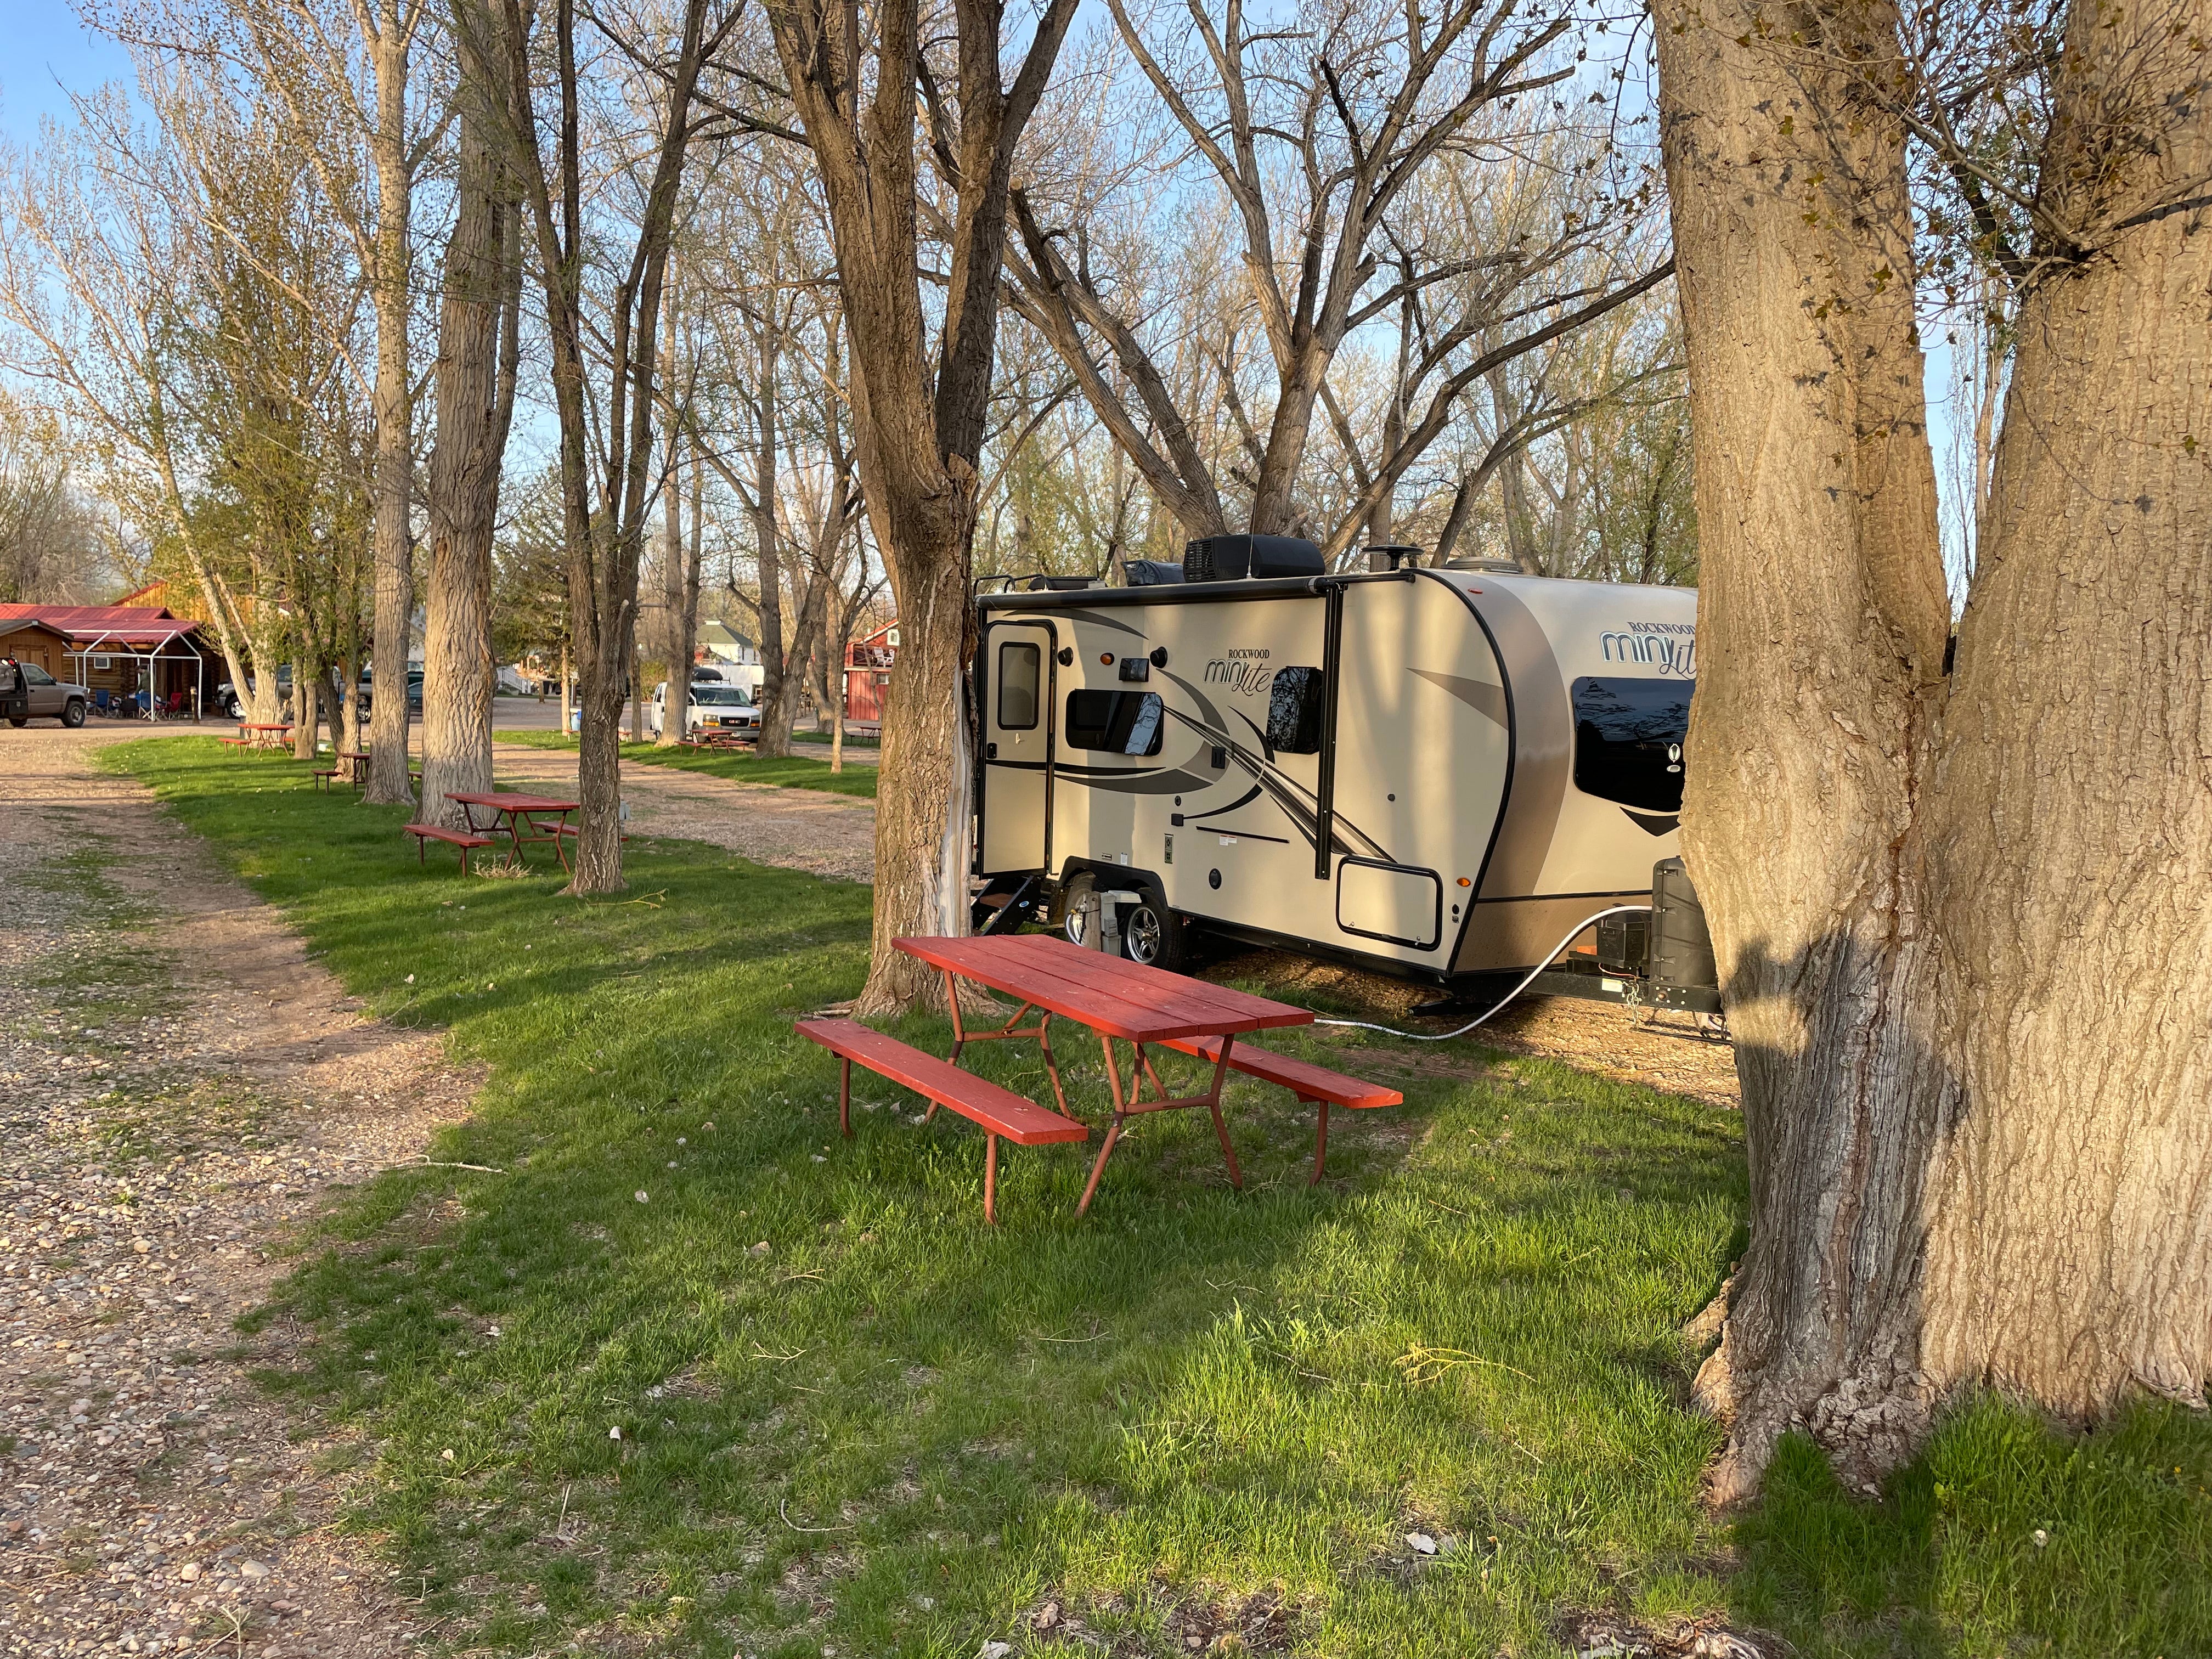 Camper submitted image from Ten sleep rv park - 1